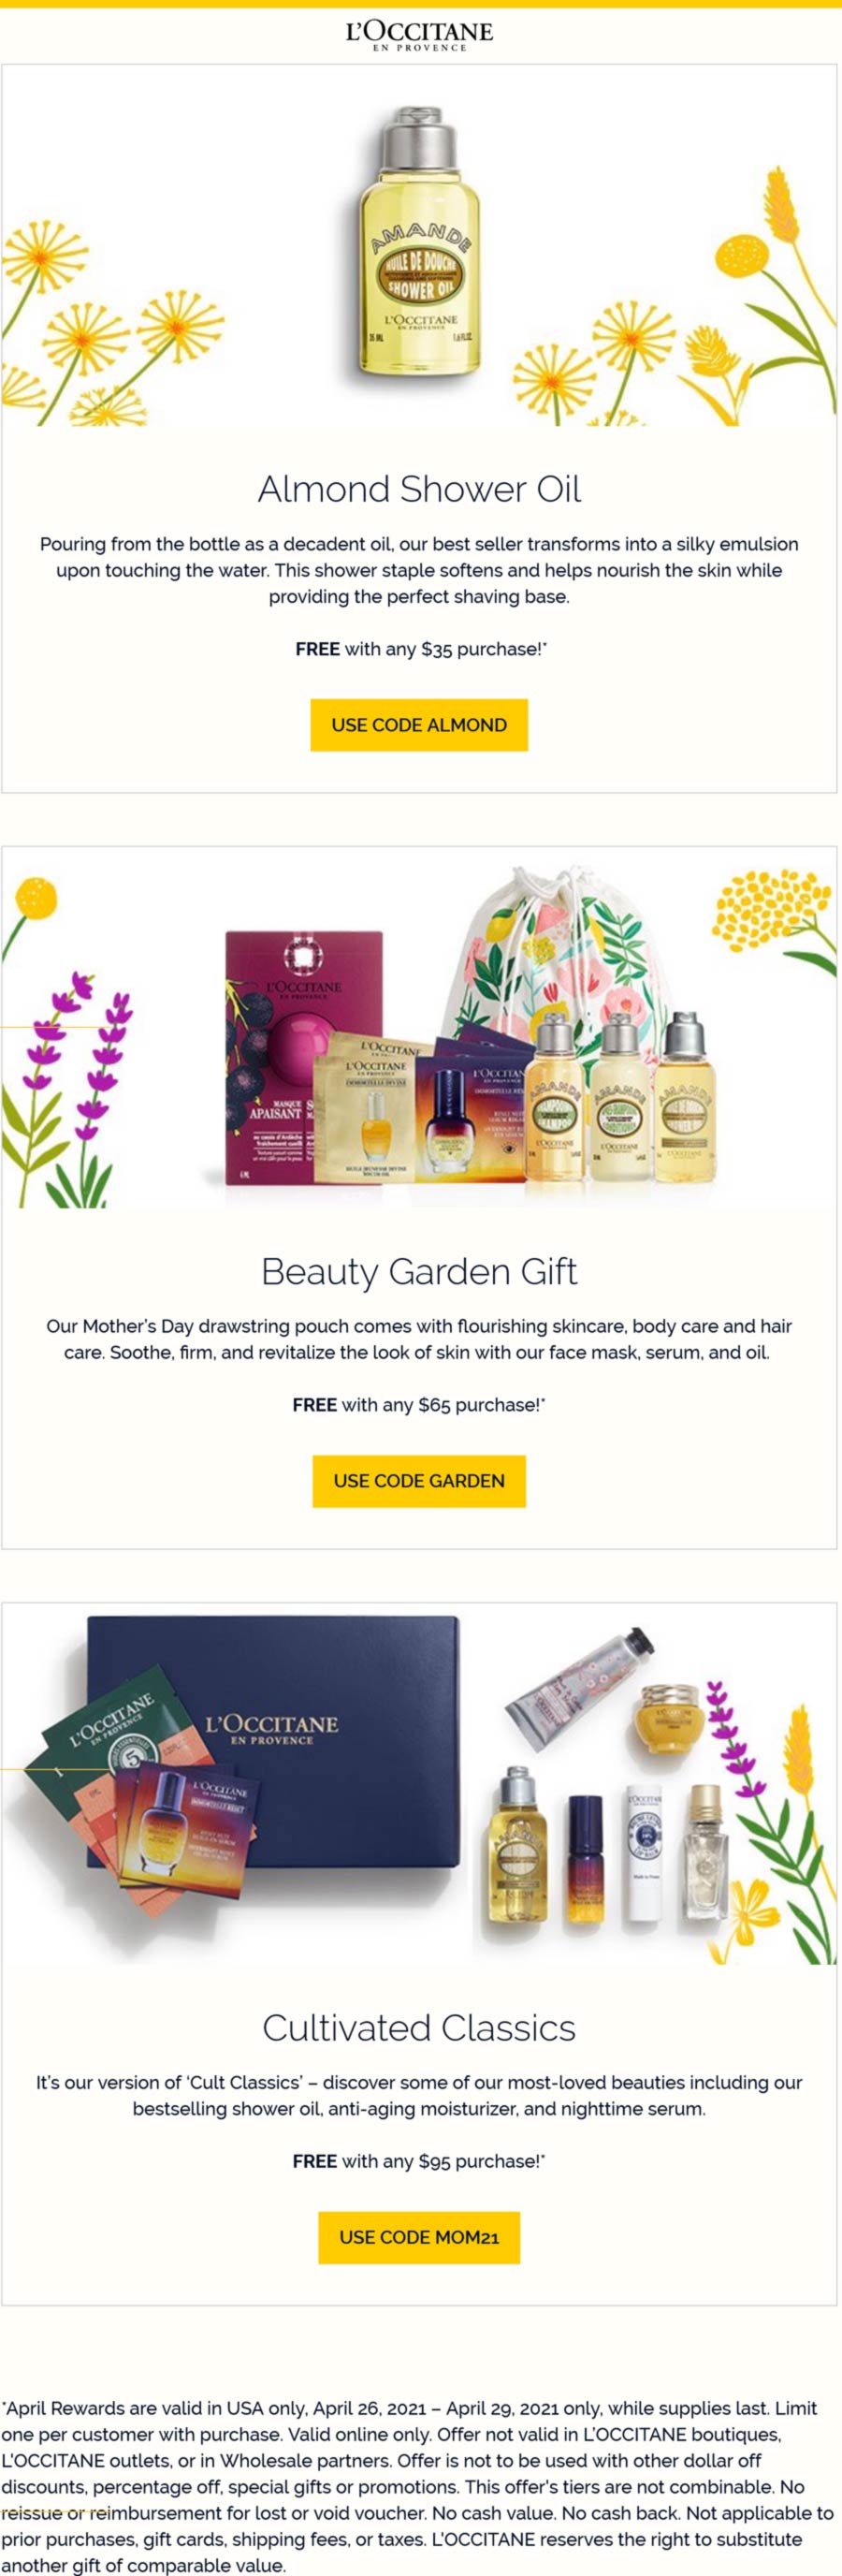 LOccitane stores Coupon  Free shower oil, 5 or 10pc kit with $35+ spent today at LOccitane via promo codes ALMOND, GARDEN or MOM21 #loccitane 